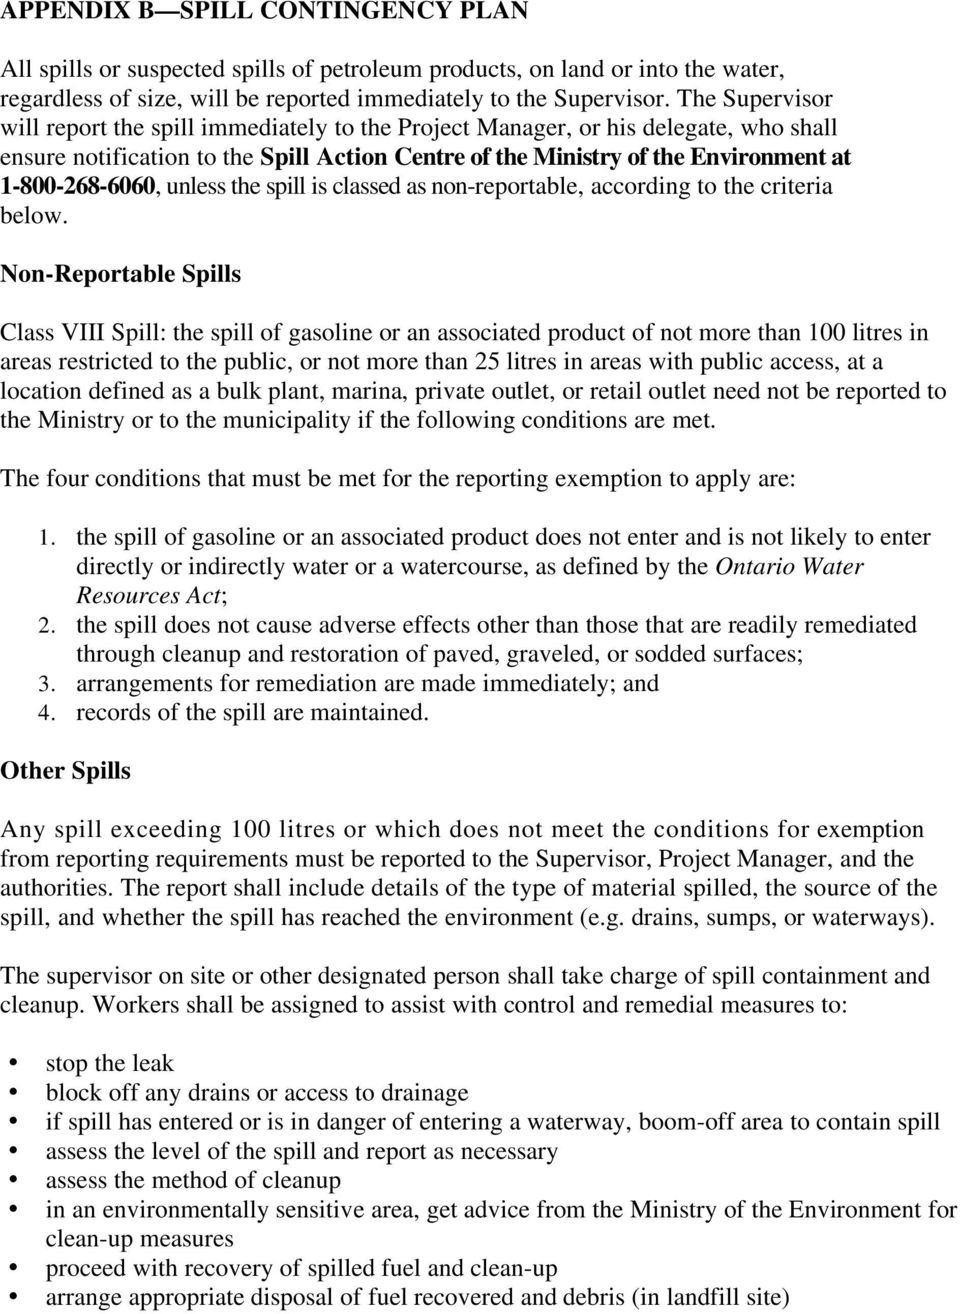 1-800-268-6060, unless the spill is classed as non-reportable, according to the criteria below.